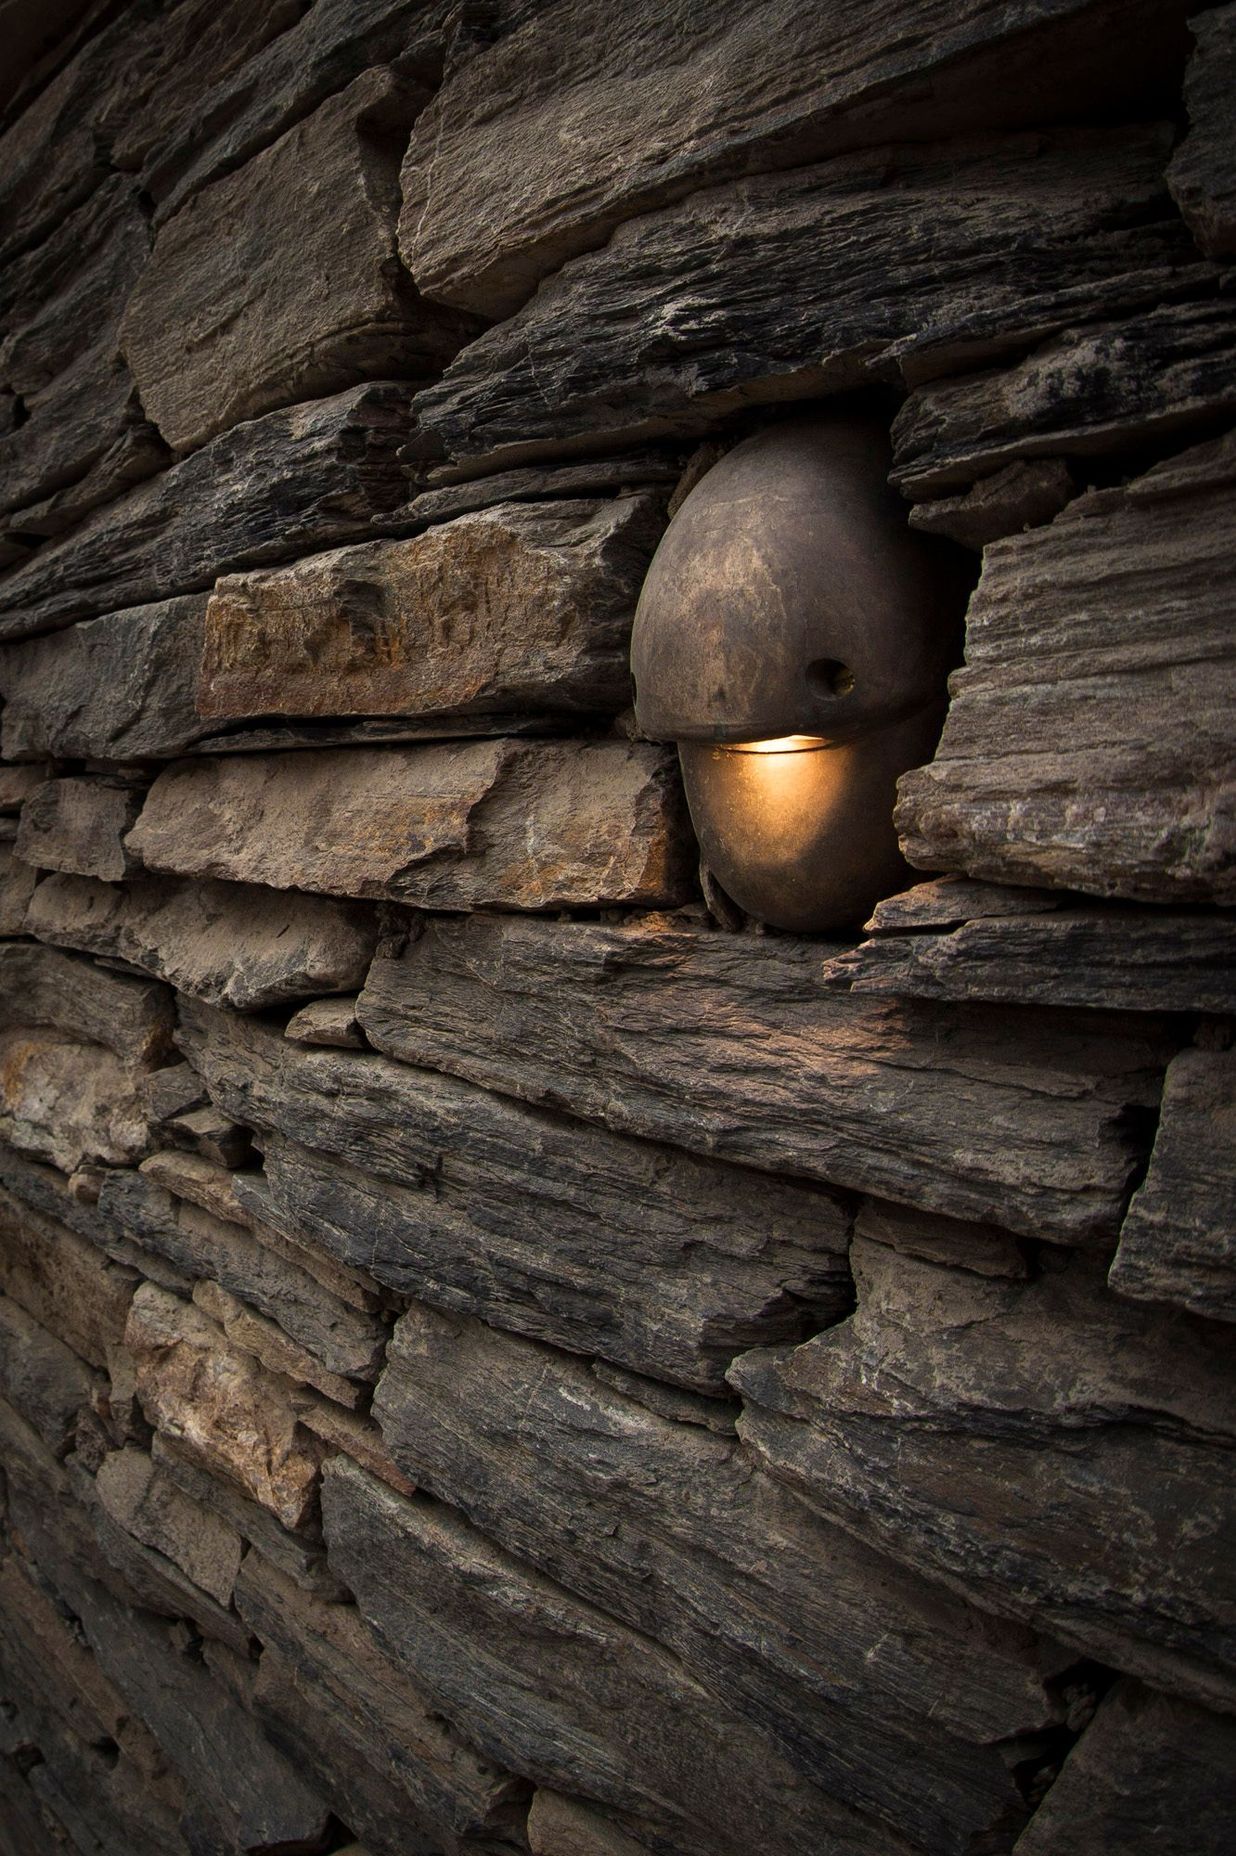 The Hunza Mouse Outdoor Wall Light blends unobtrusively into outdoor environments.